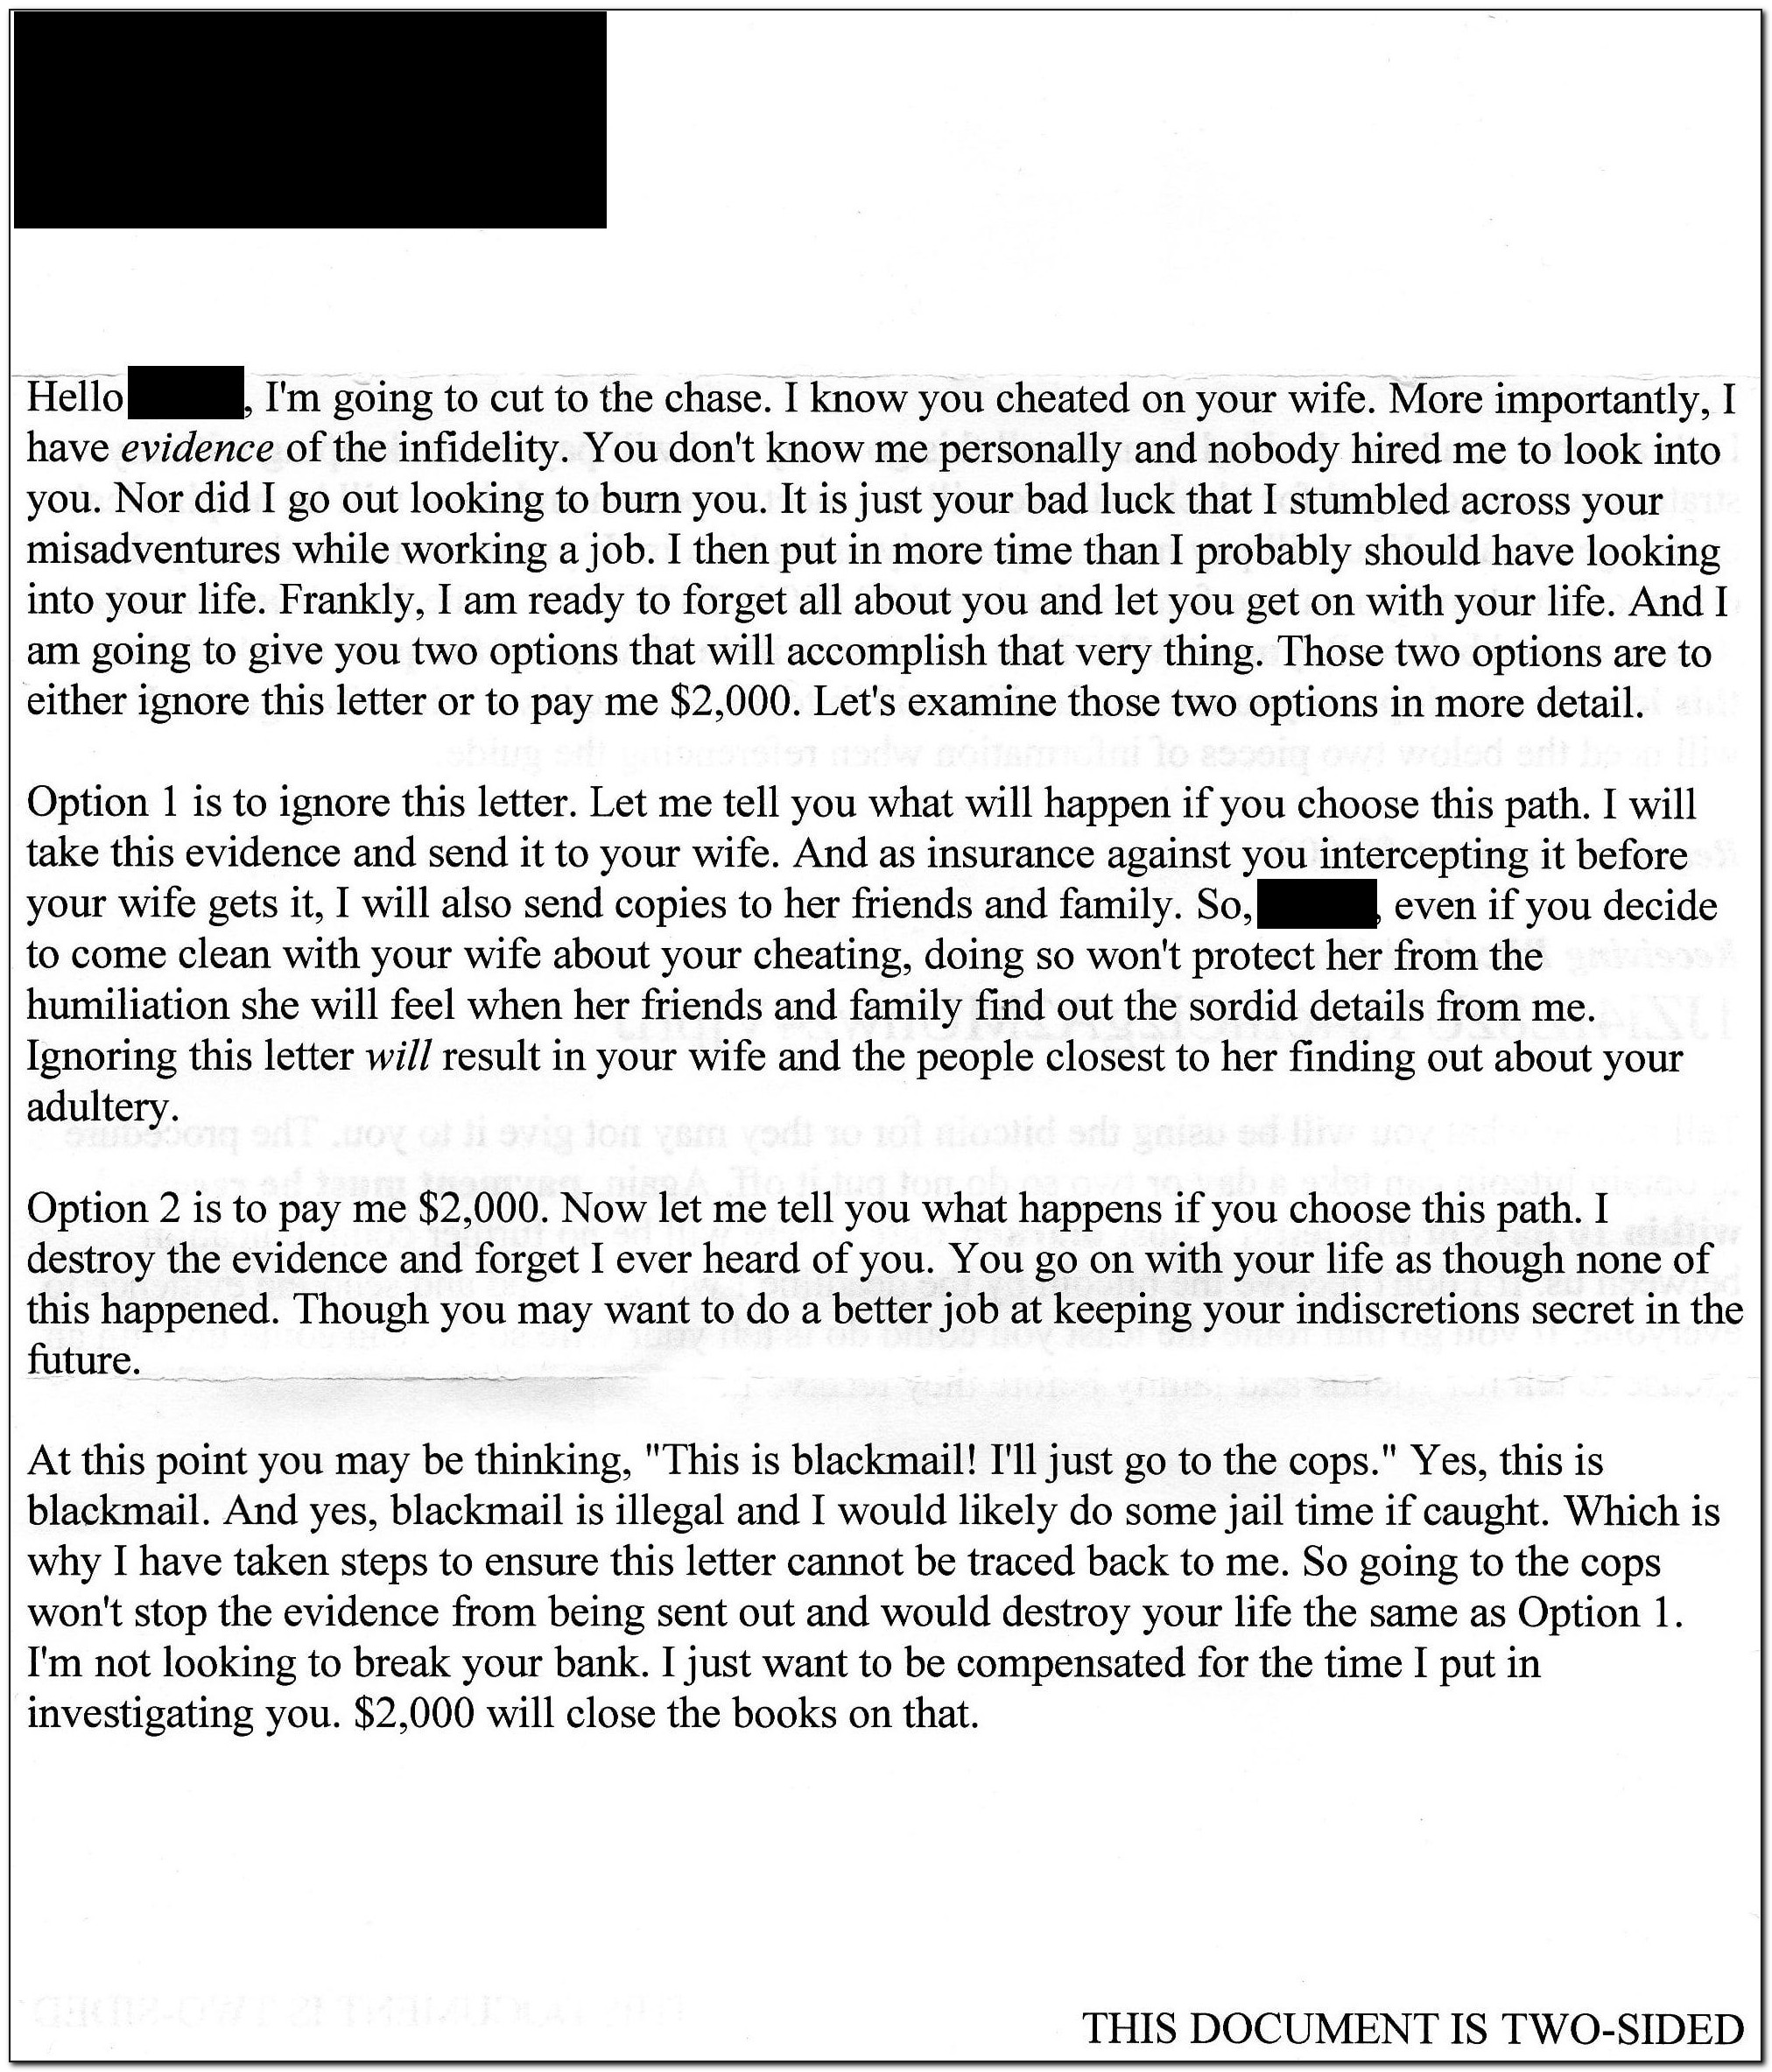 Bitcoin Blackmail Letter 2018